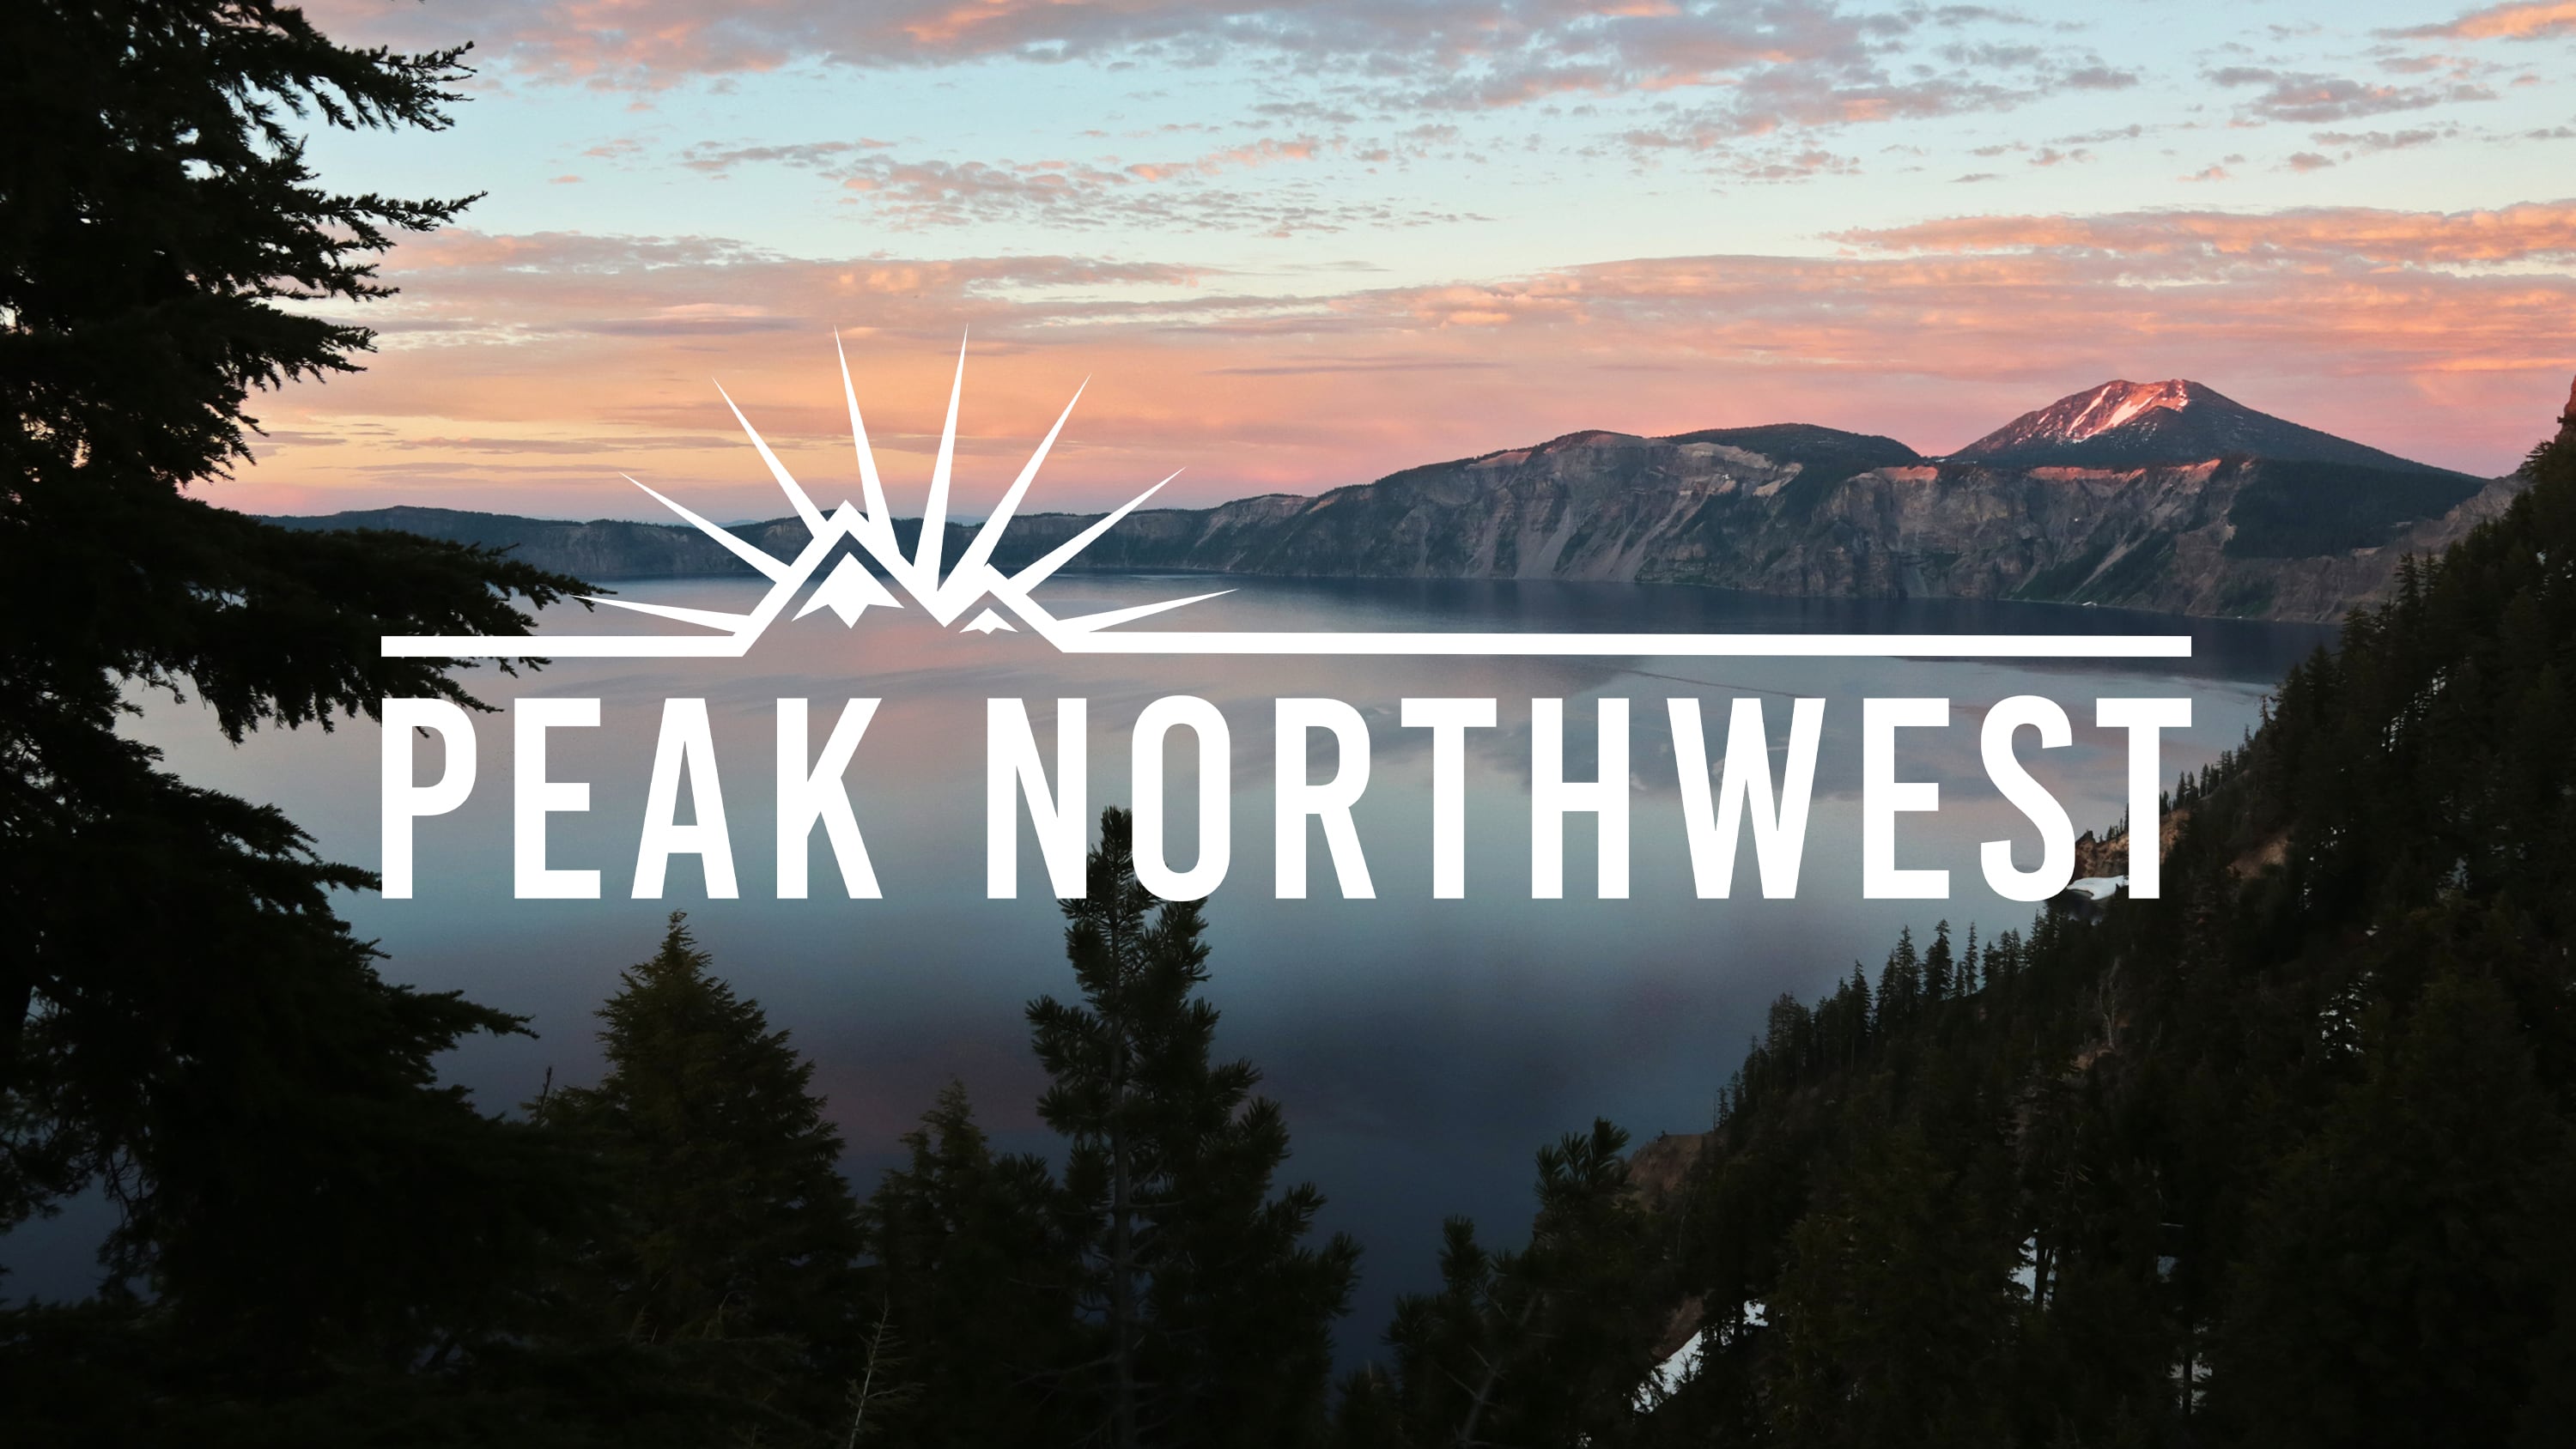  How to make the most of one night at Crater Lake National Park: Peak Northwest podcast 